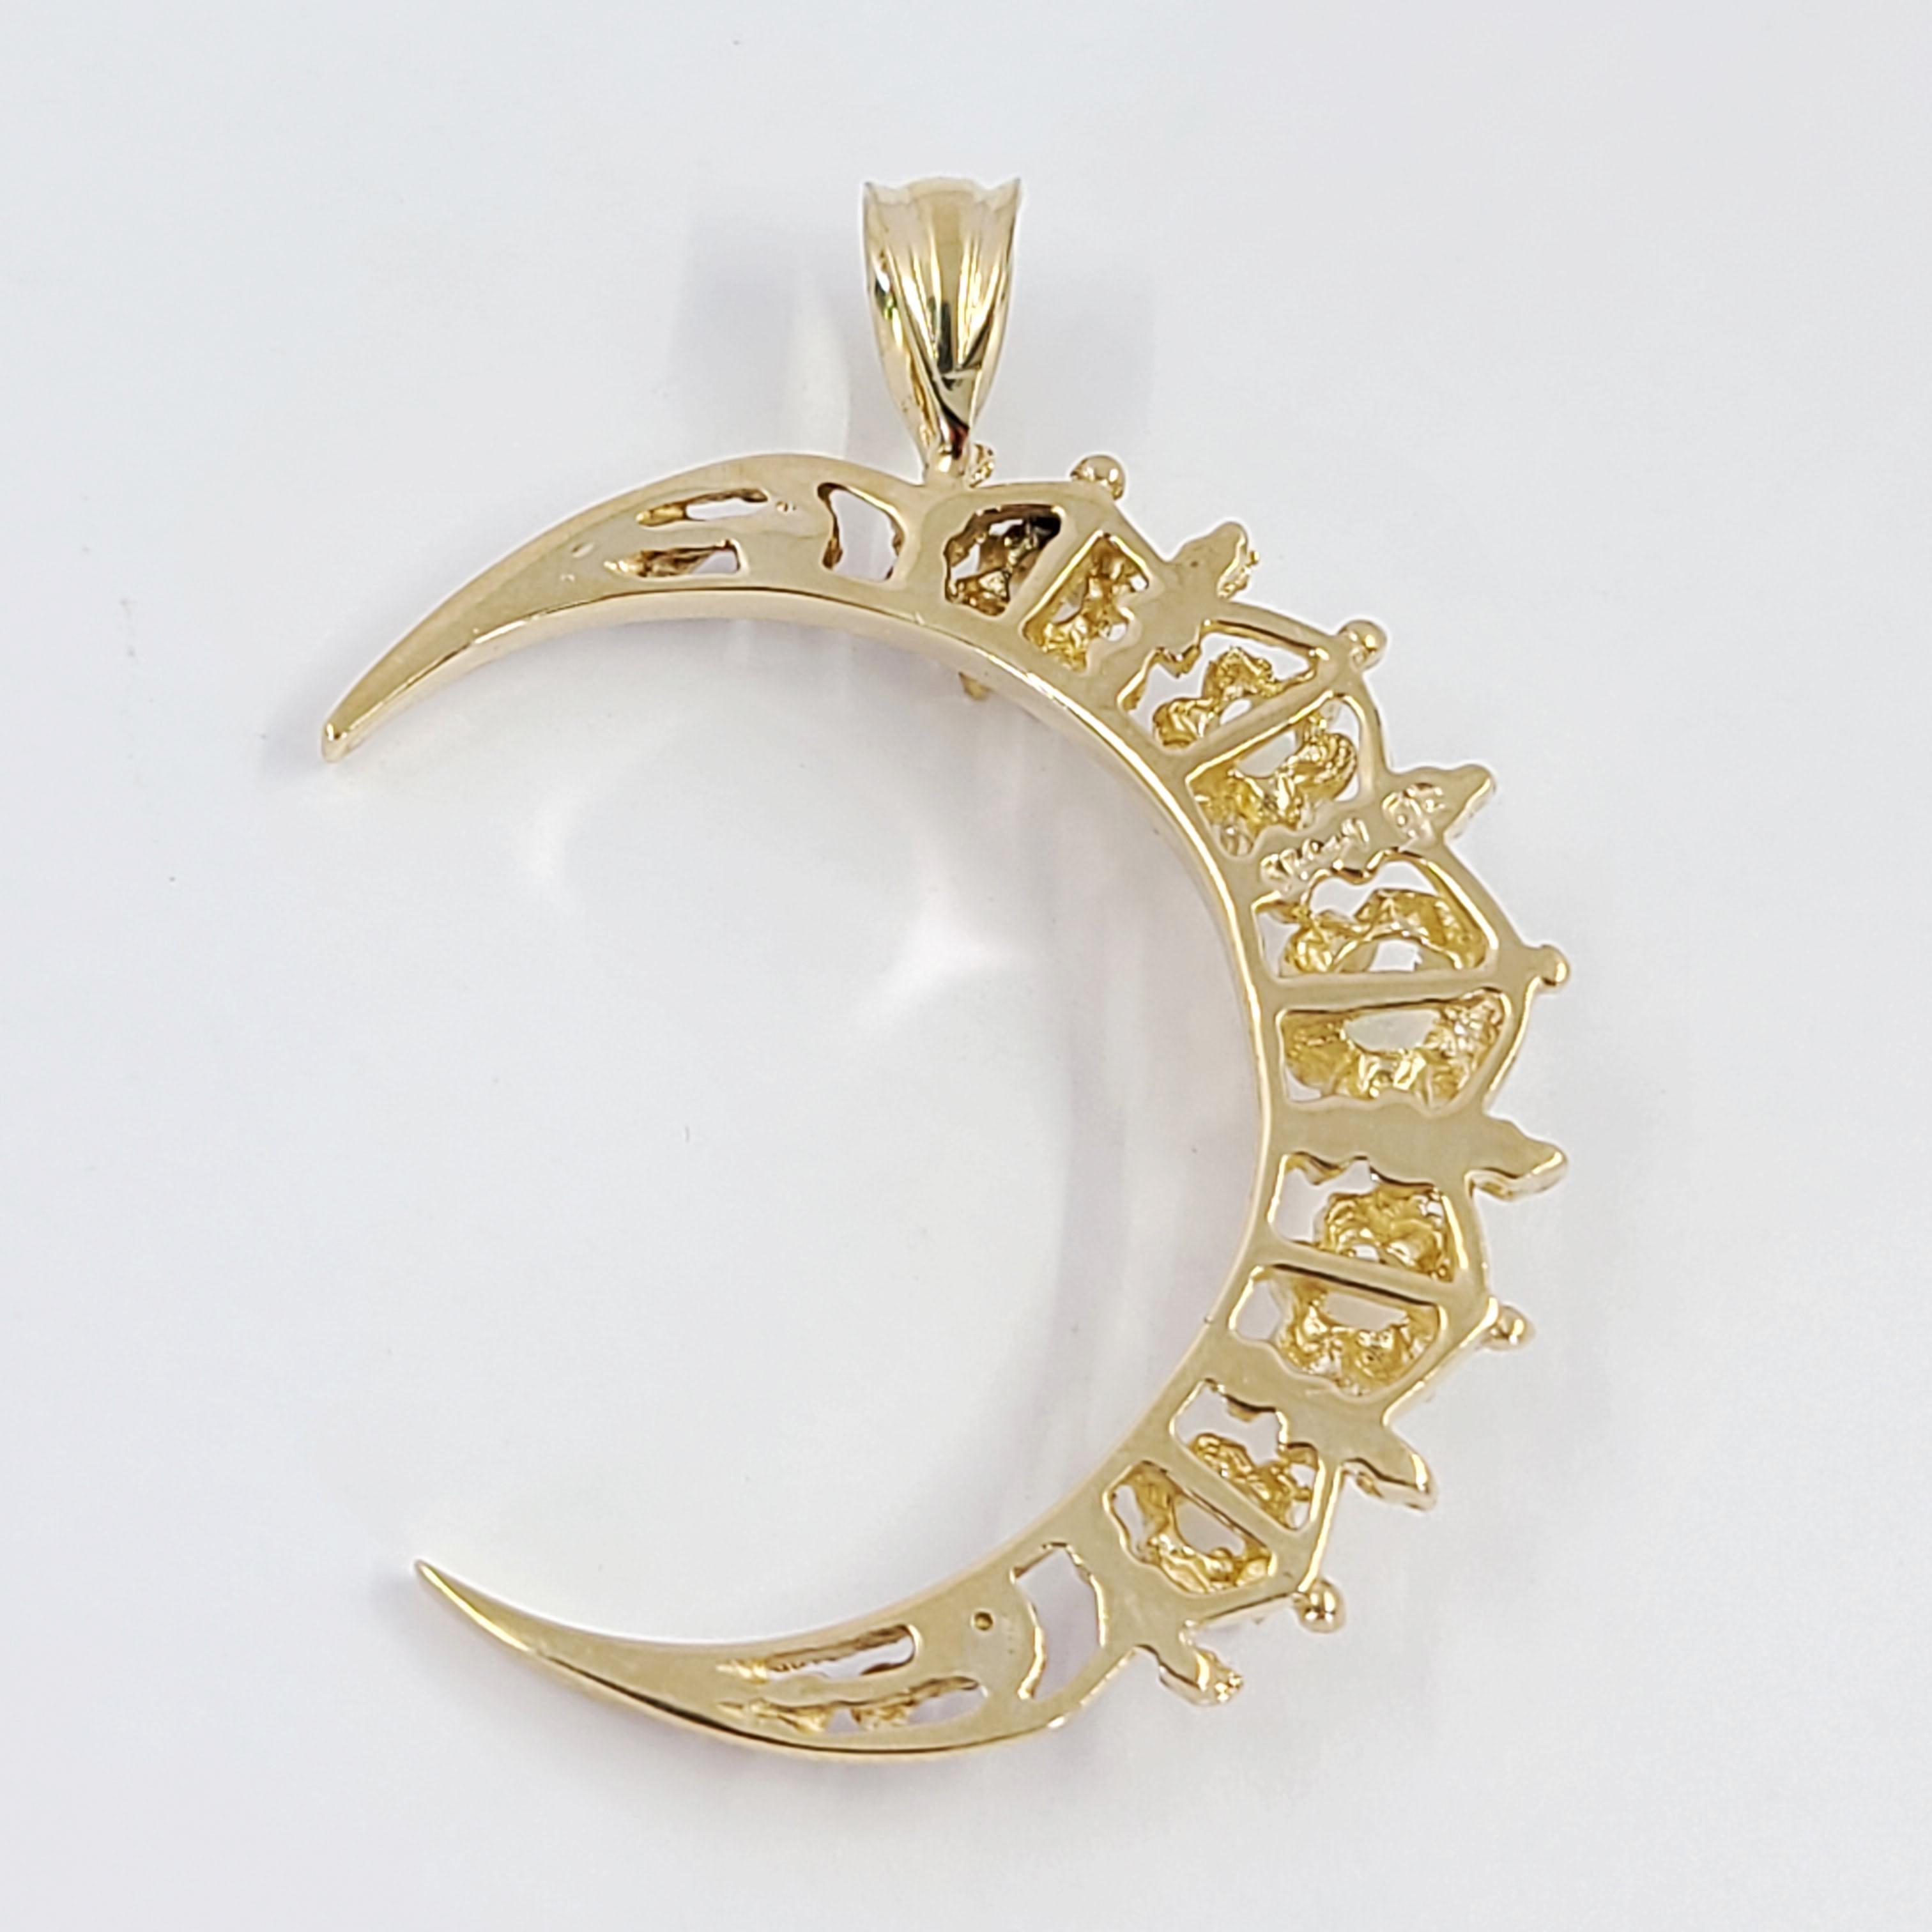 14 Karat Yellow Gold Crescent Moon Pendant Featuring 5 Round Opals Totaling Approximately 0.25 Carats. 4.5 Inches Long Including Bale. Finished Weight Is 4.2 Grams.